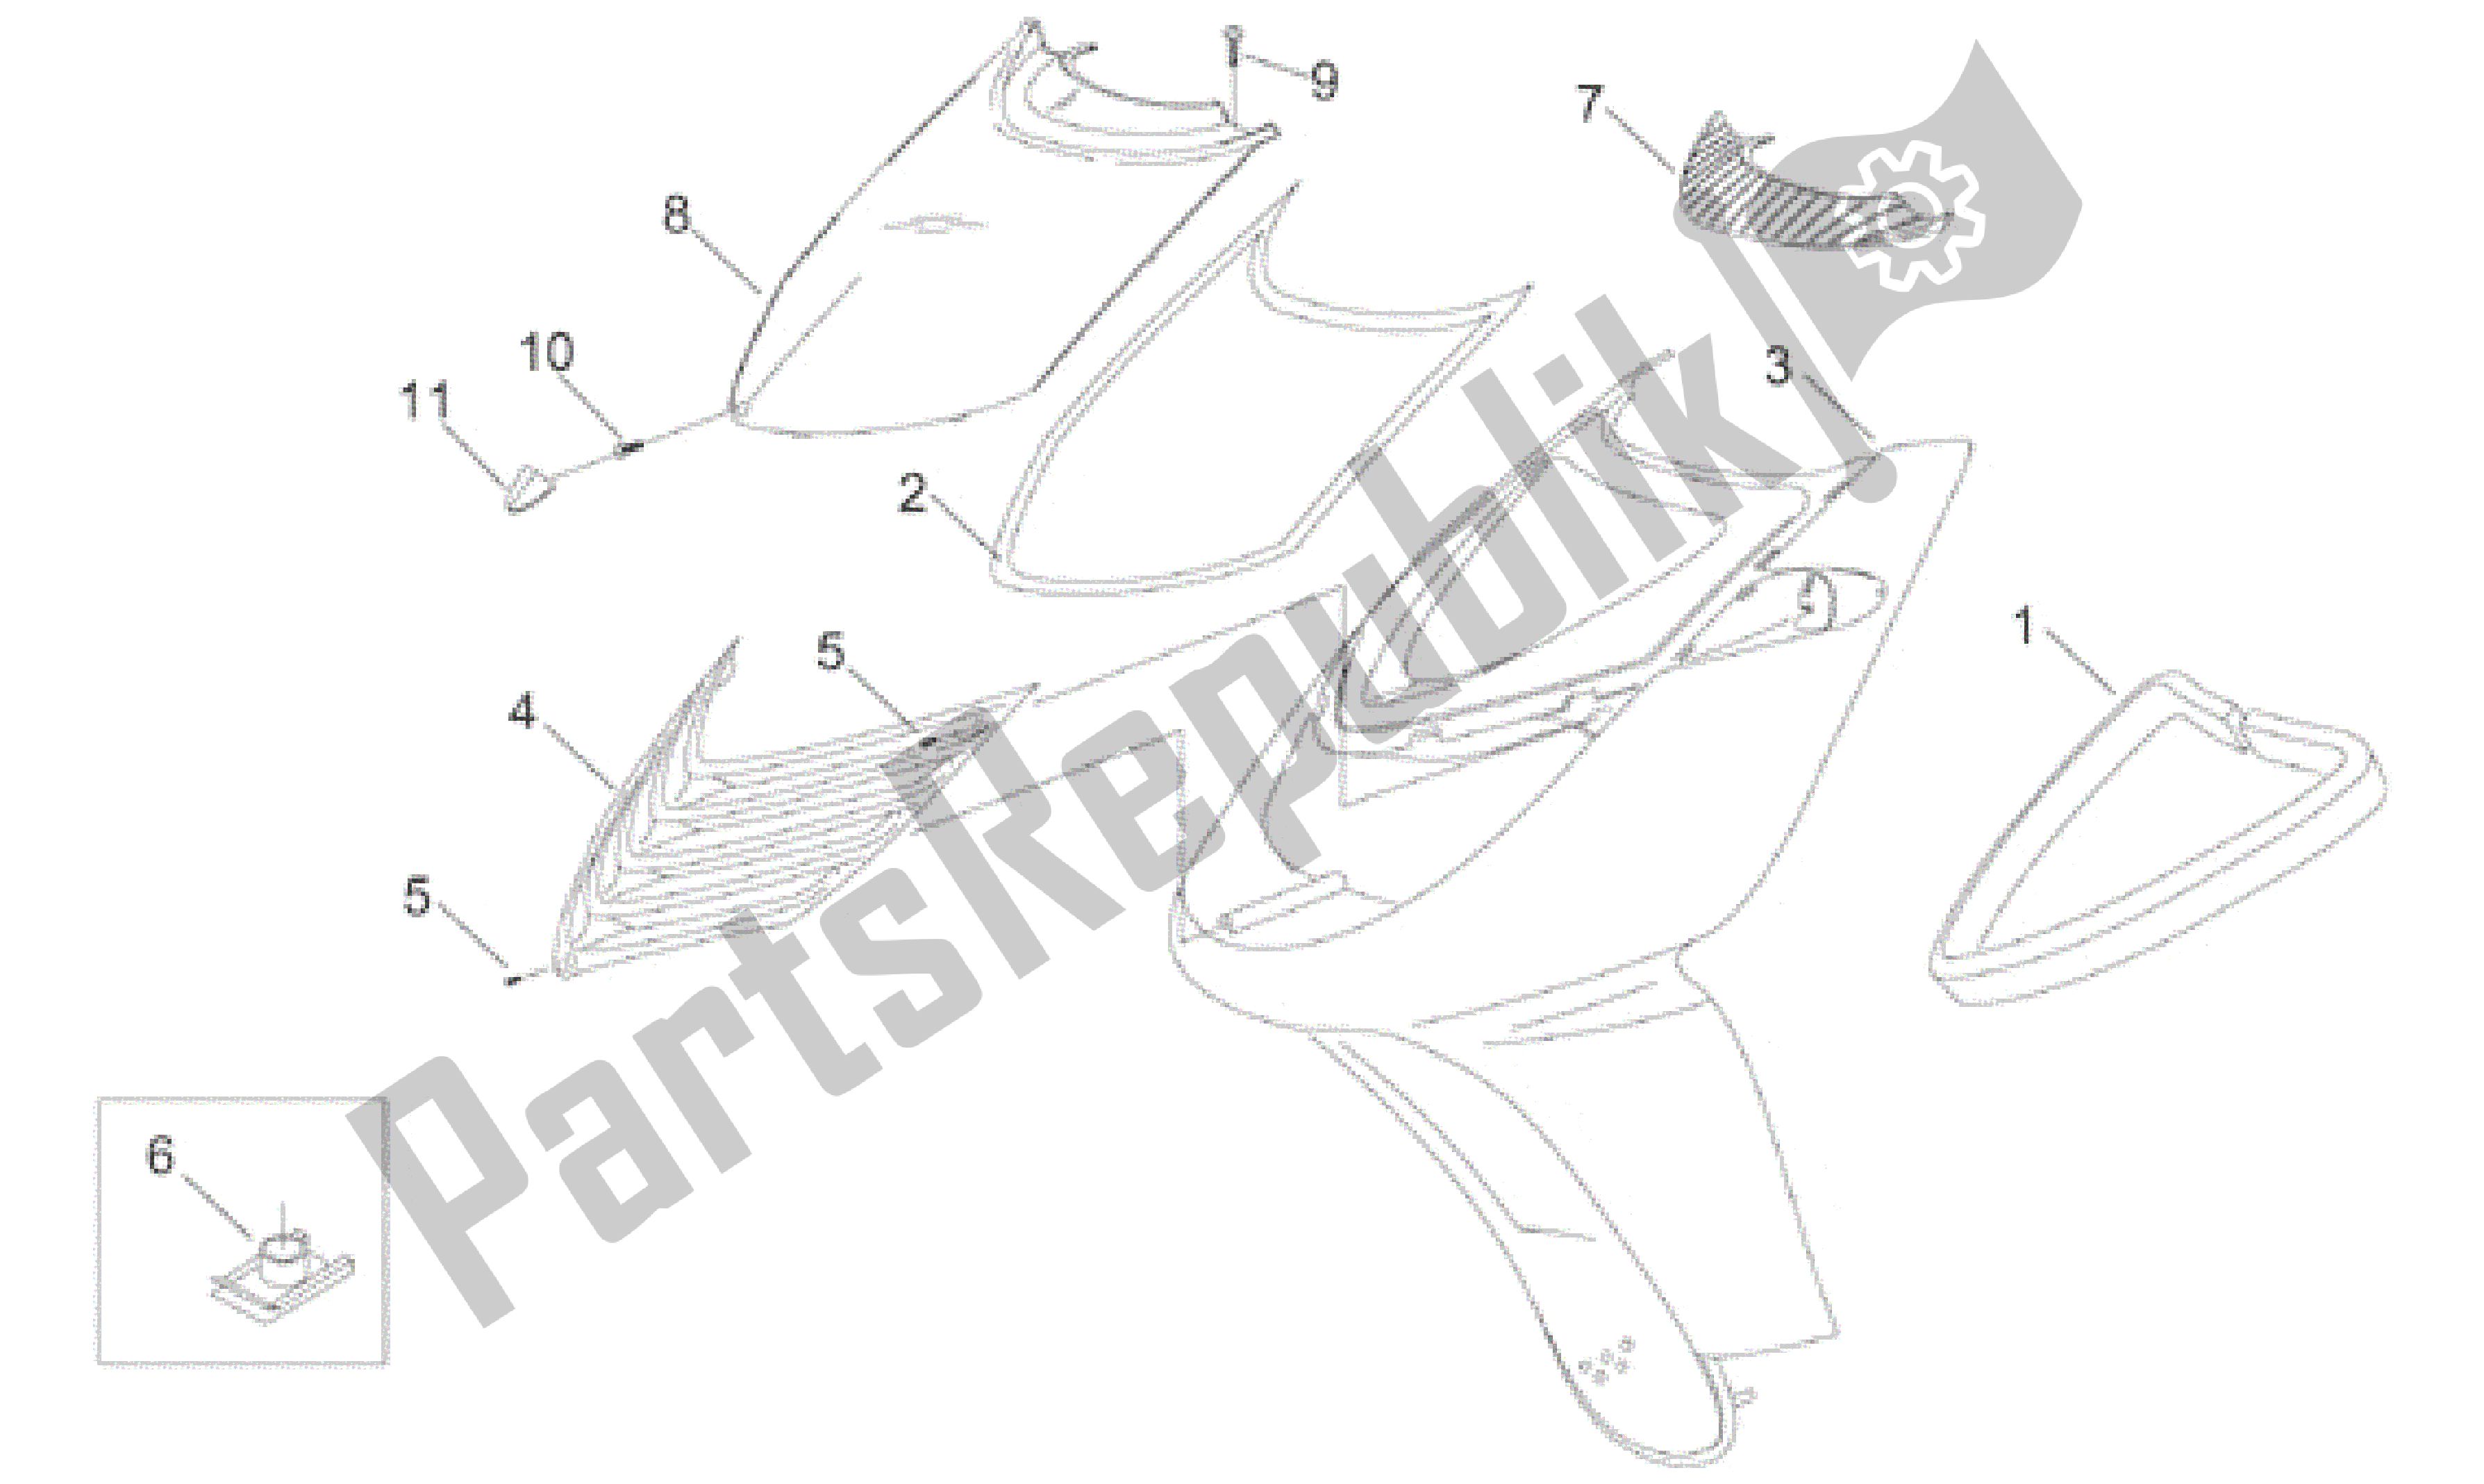 All parts for the Front Body - Front Fairing of the Aprilia Sonic 50 1998 - 2001